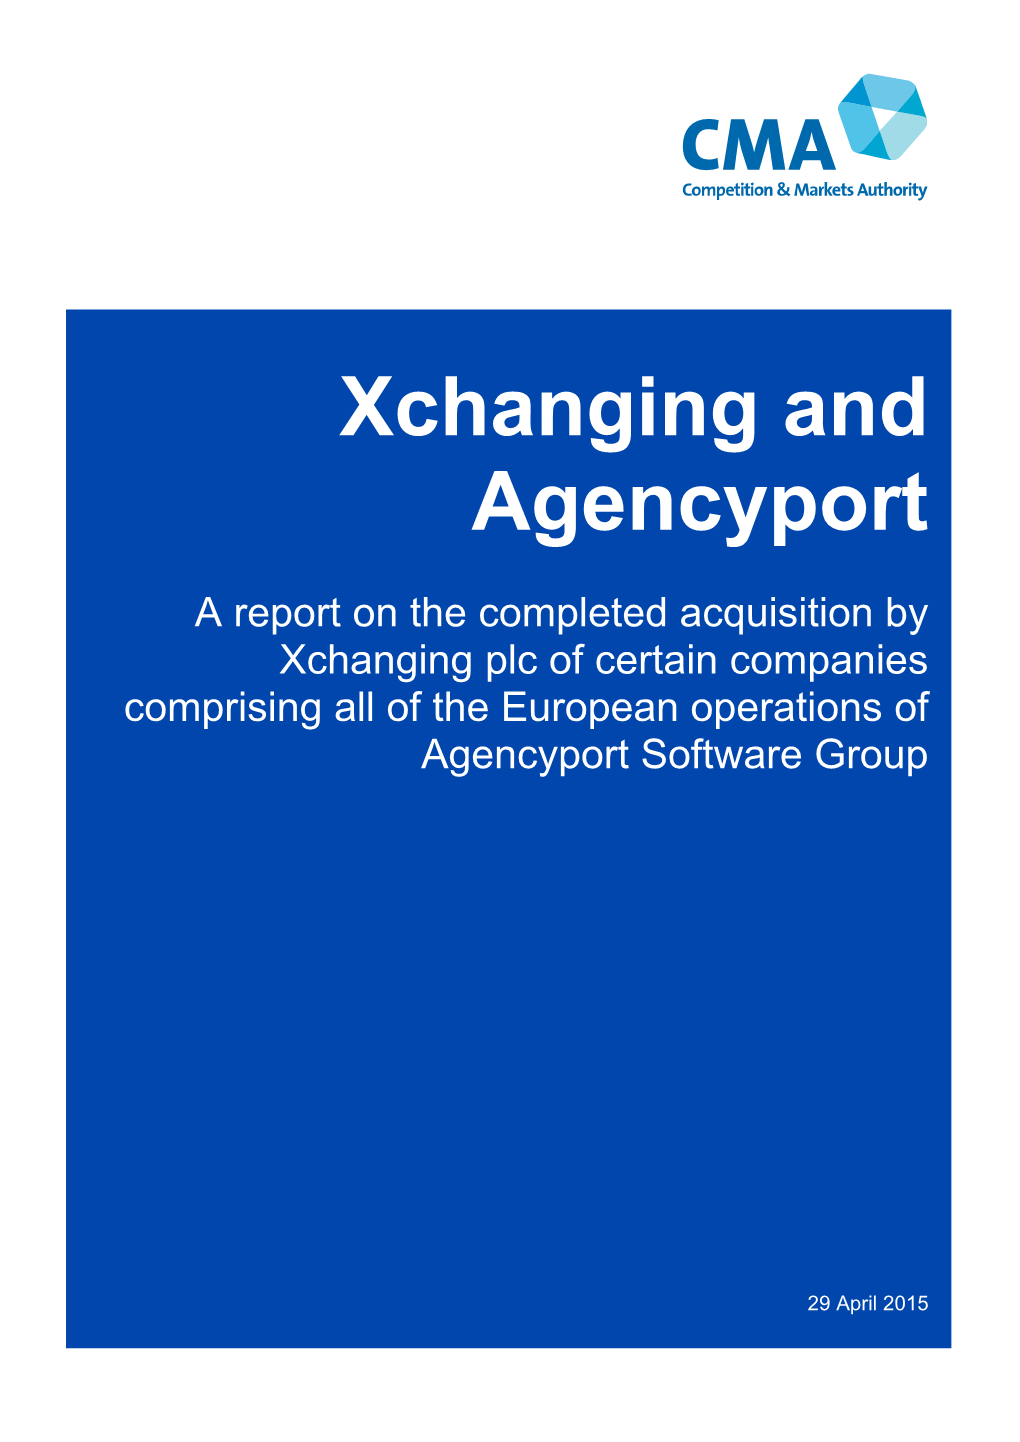 Xchanging and Agencyport